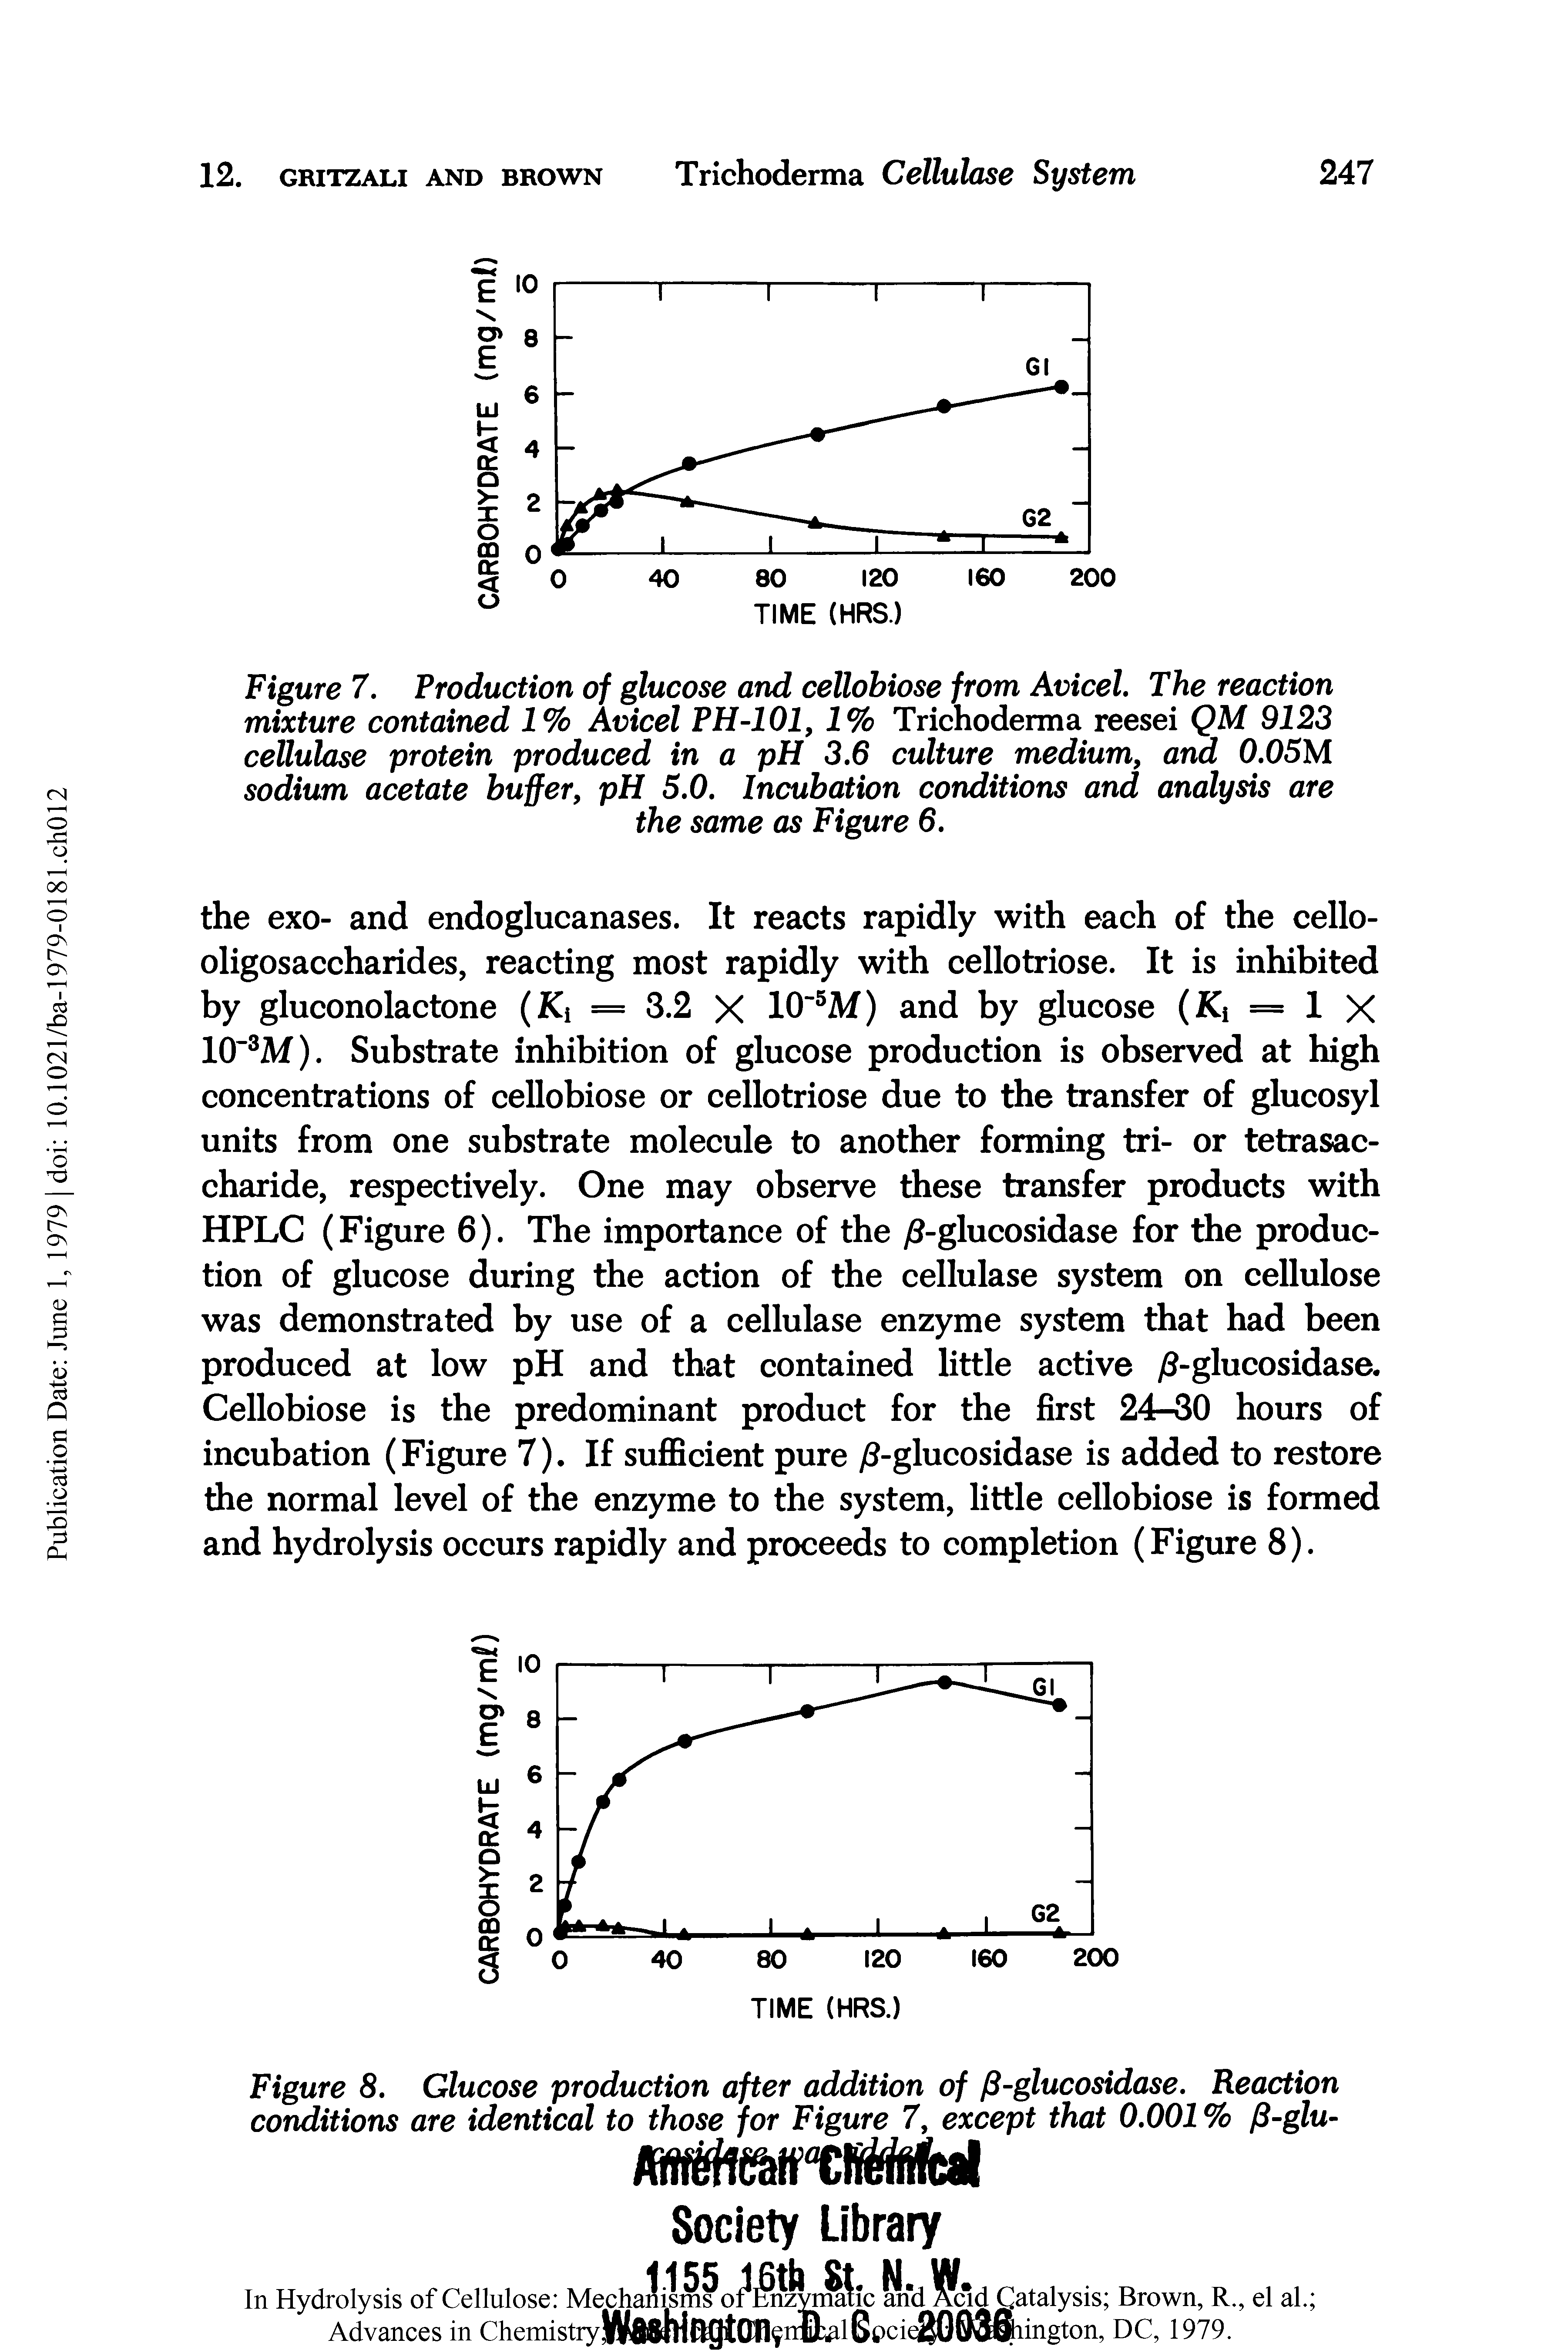 Figure 7. Production of glucose and cellobiose from Avicel. The reaction mixture contained 1% Avicel PH-101, 1% Trichoderma reesei QM 9123 cellulose protein produced in a pH 3.6 culture medium, and 0.05M sodium acetate buffer, pH 5.0. Incubation conditions and analysis are...